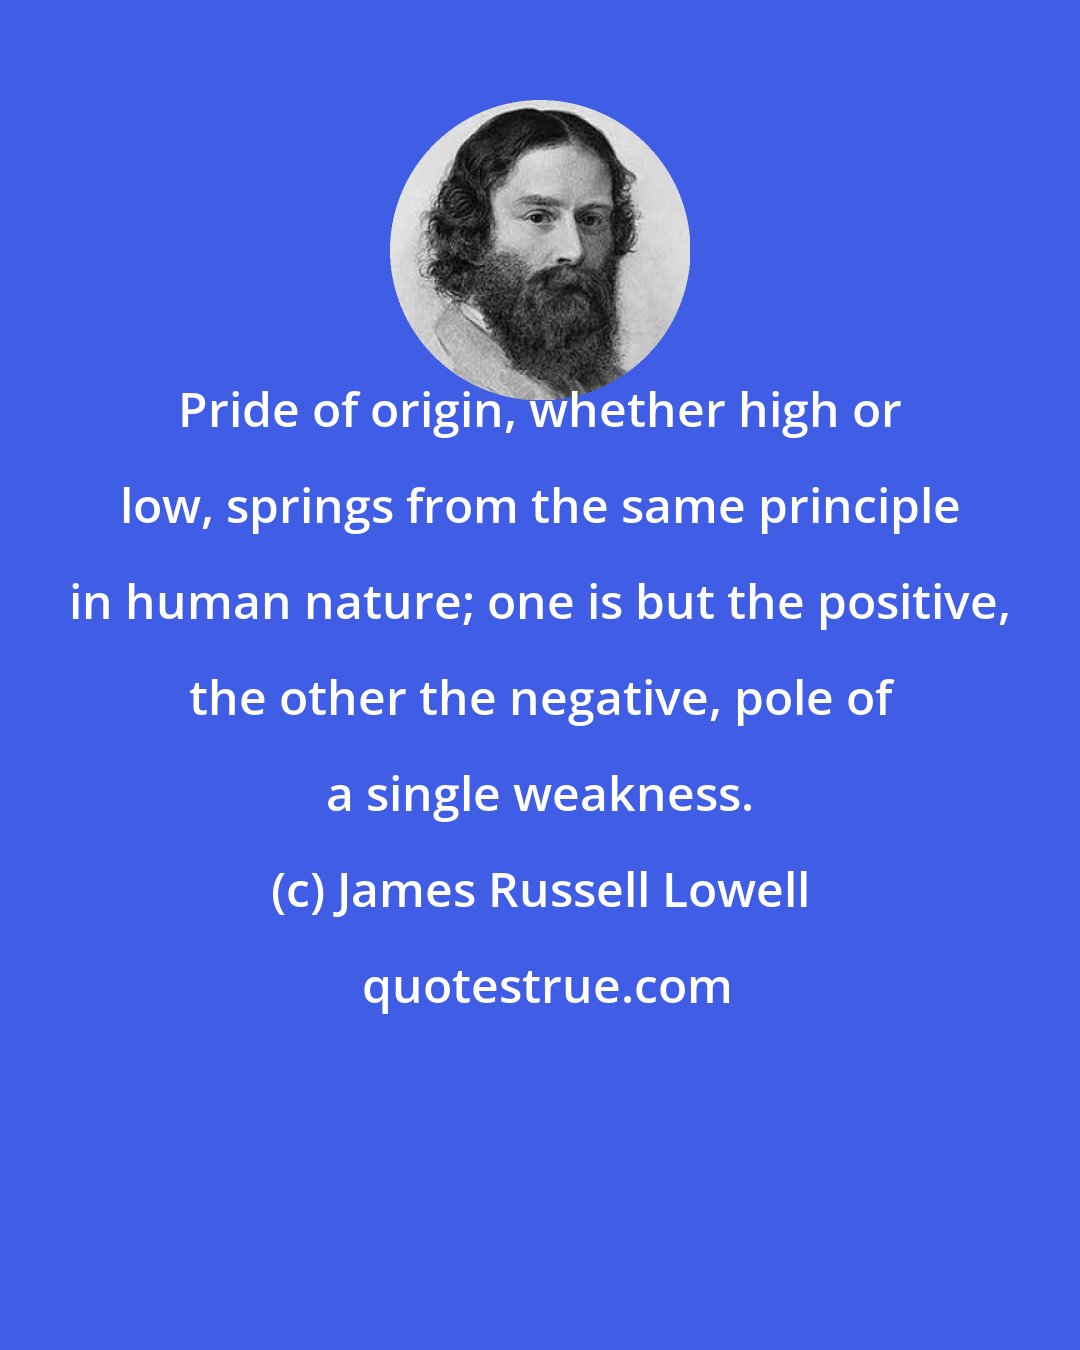 James Russell Lowell: Pride of origin, whether high or low, springs from the same principle in human nature; one is but the positive, the other the negative, pole of a single weakness.